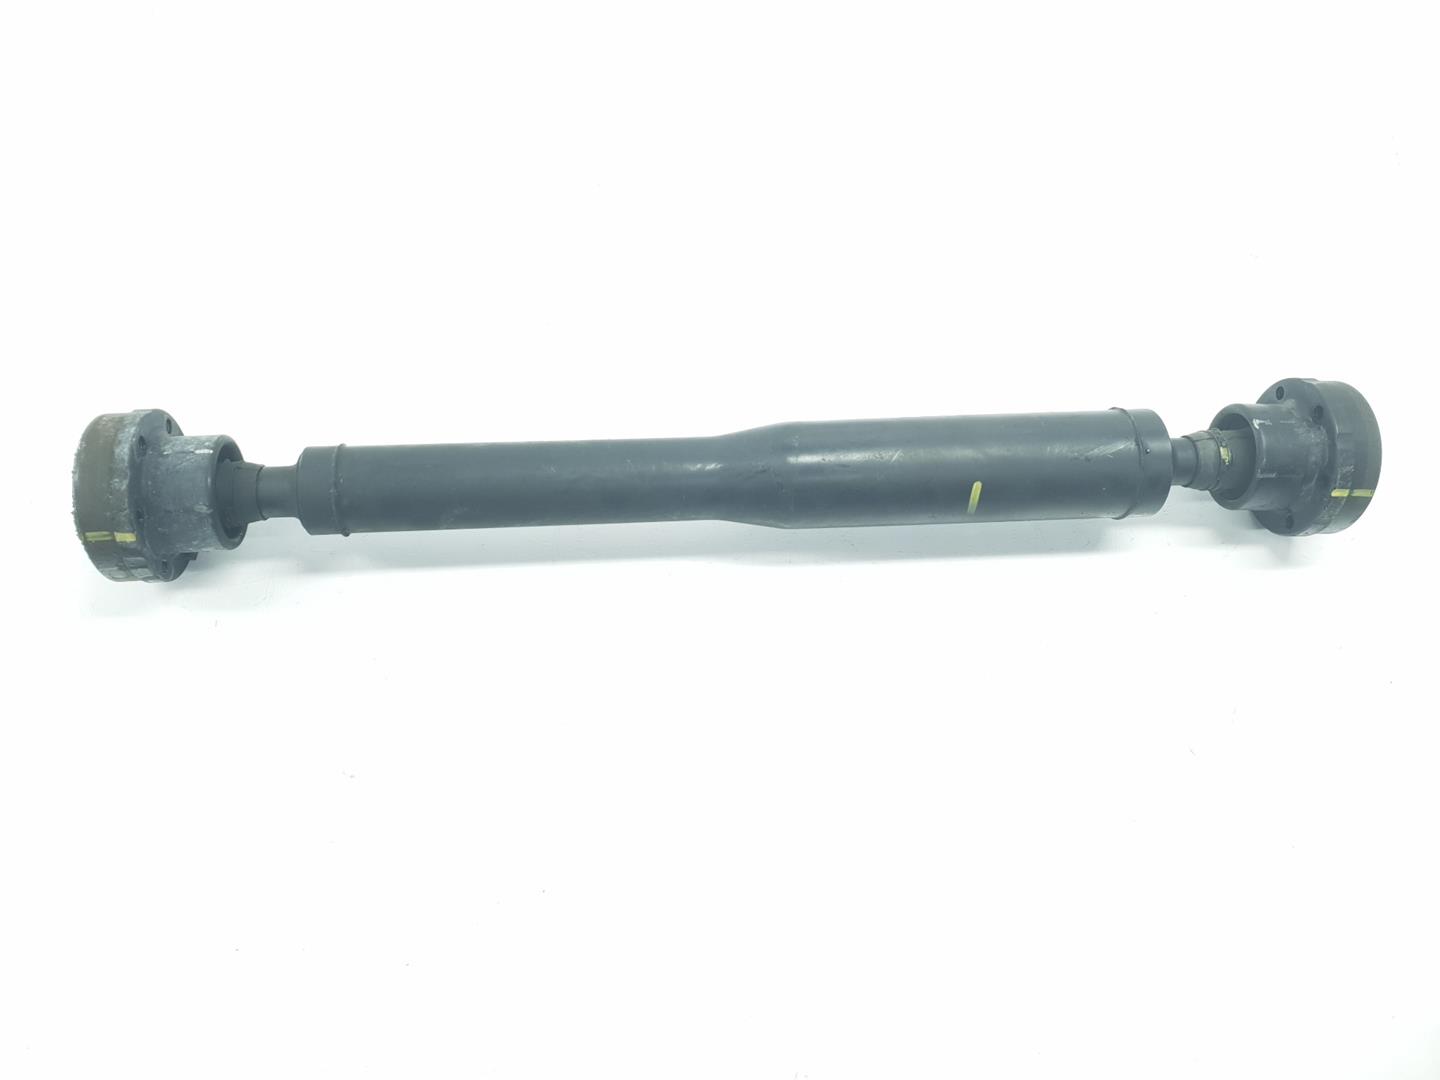 LAND ROVER Discovery 3 generation (2004-2009) Propshaft Front Part TVB500160, TVB500160 24237474